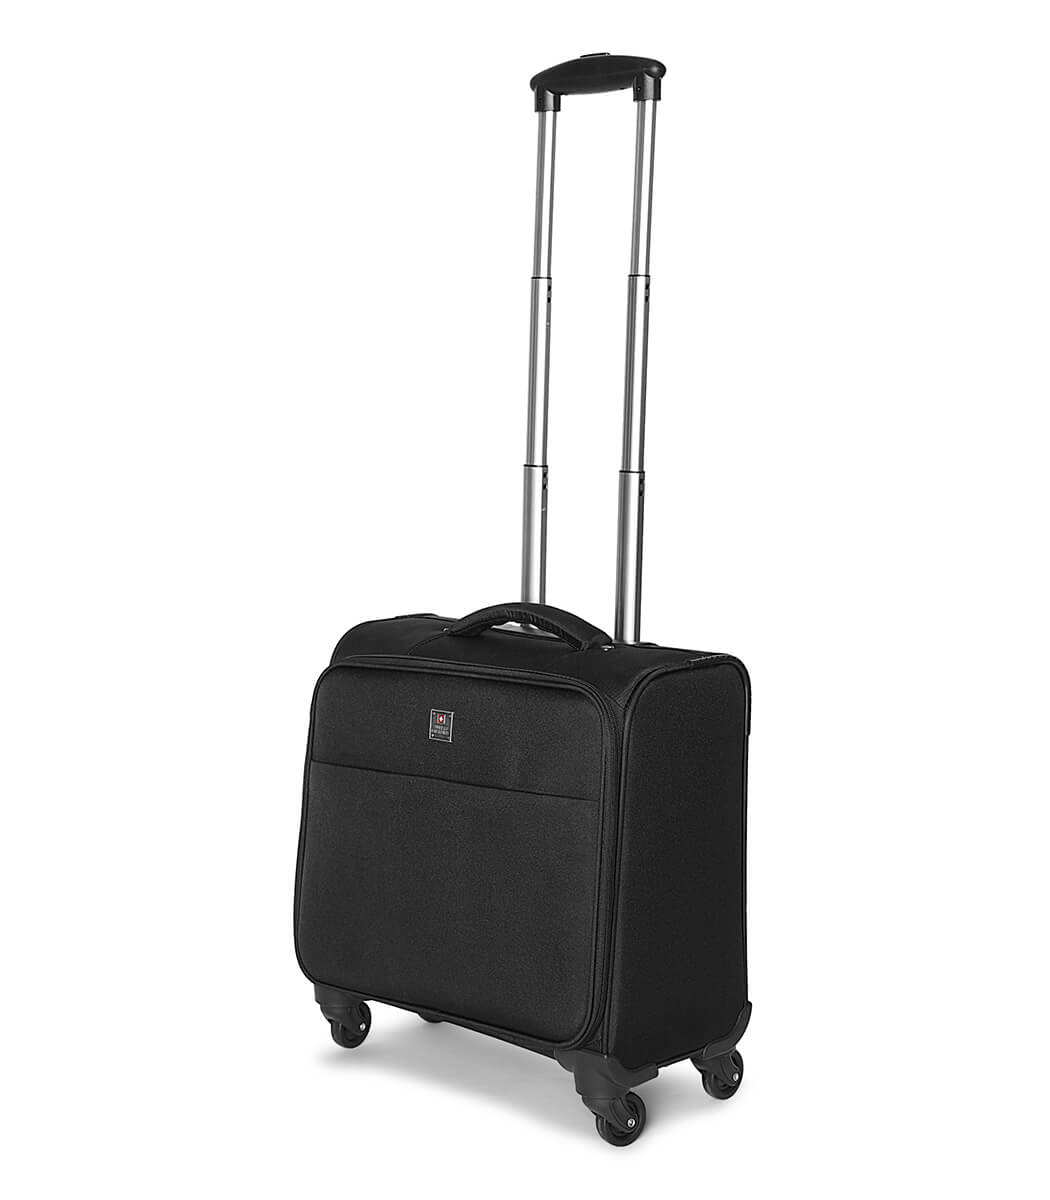  the Trooper 24 cm Soft Trolley Cabin Laptop Bag  your perfect travel companion This sleek and durable bag is equipped with a 3 dial lock for added security